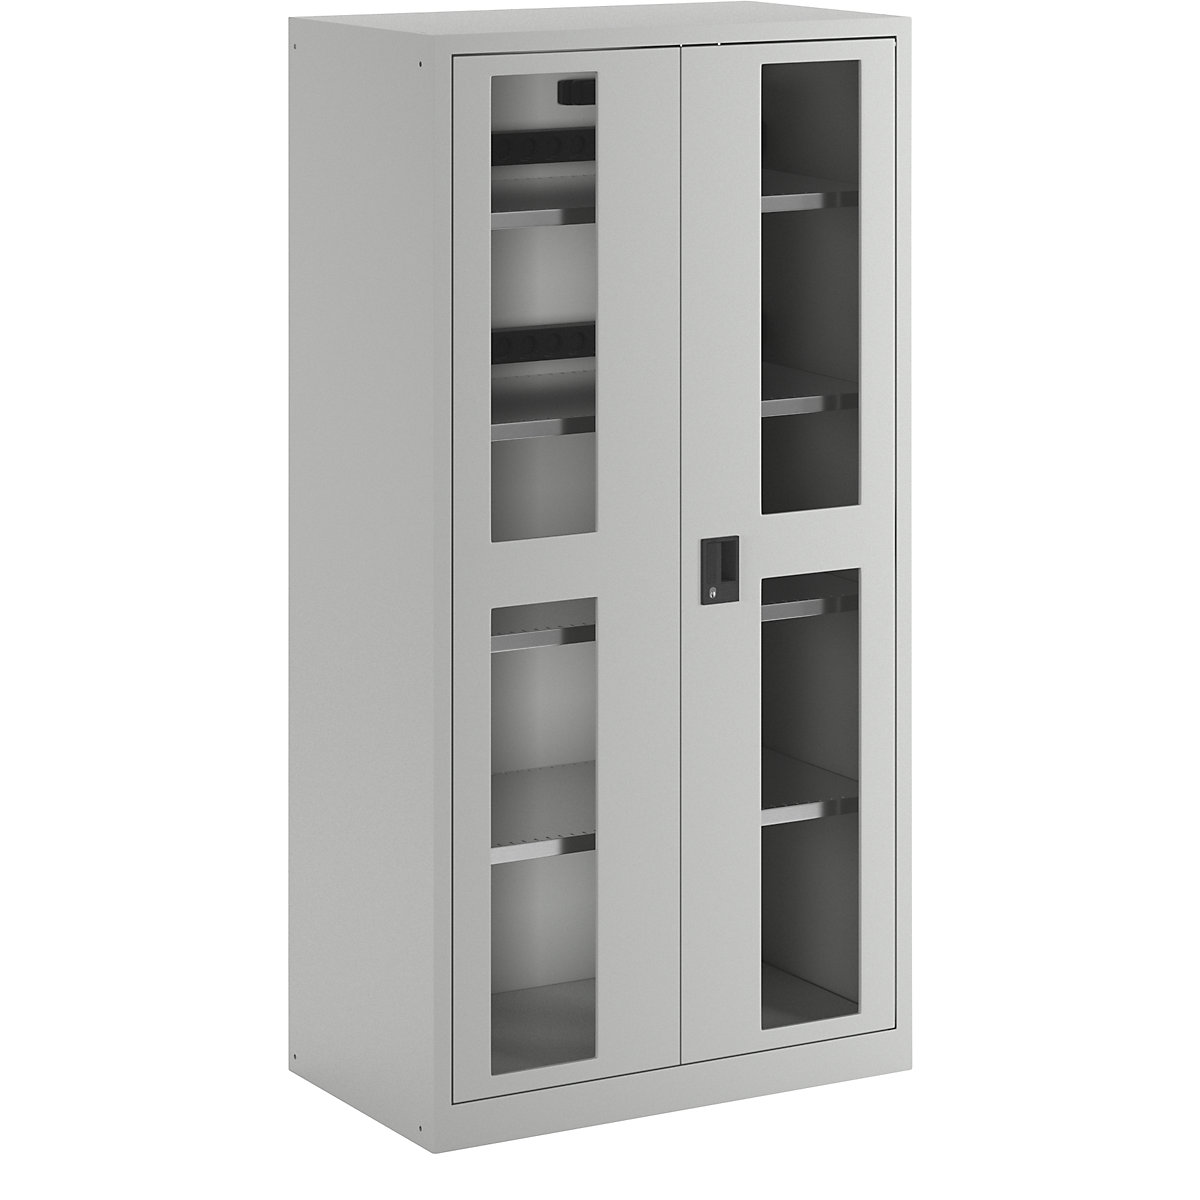 Battery charging cabinet – LISTA, 4 shelves, vision panel doors, 2 power strips at rear with RCD/circuit breaker, grey-21